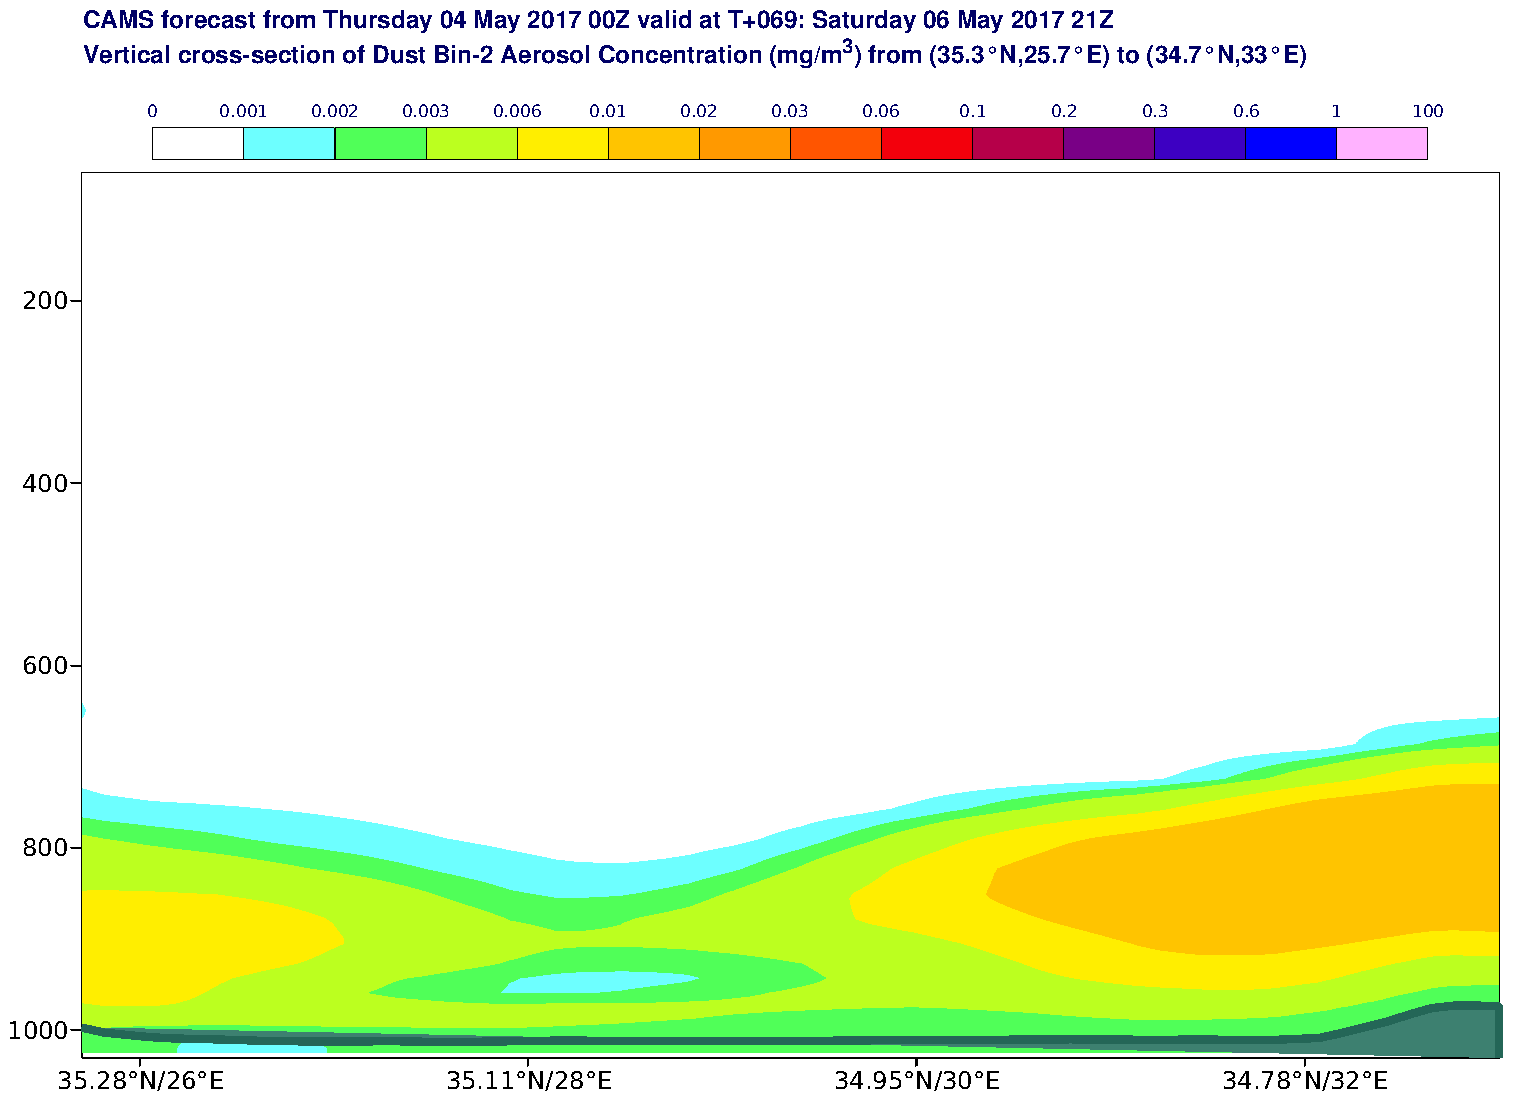 Vertical cross-section of Dust Bin-2 Aerosol Concentration (mg/m3) valid at T69 - 2017-05-06 21:00